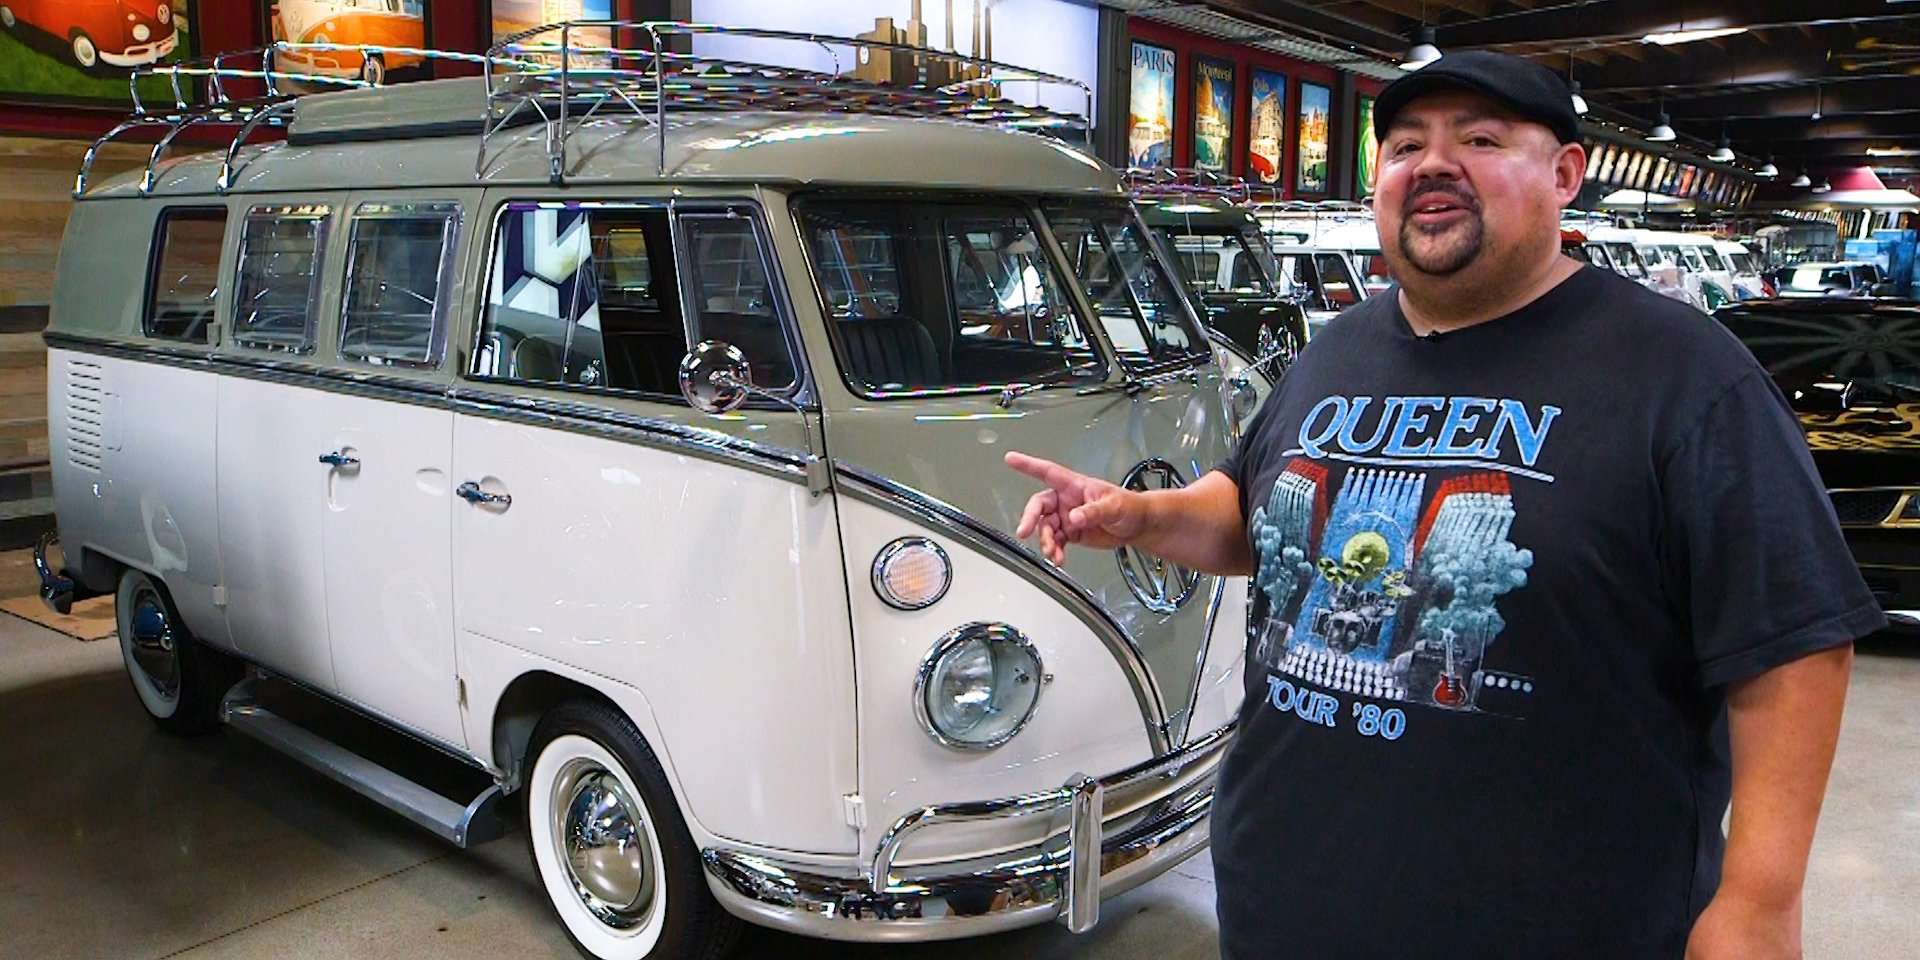 Taboola Ad Example 56545 - Inside Comedian Gabriel 'Fluffy' Iglesias' $3 Million Volkswagen Bus Collection